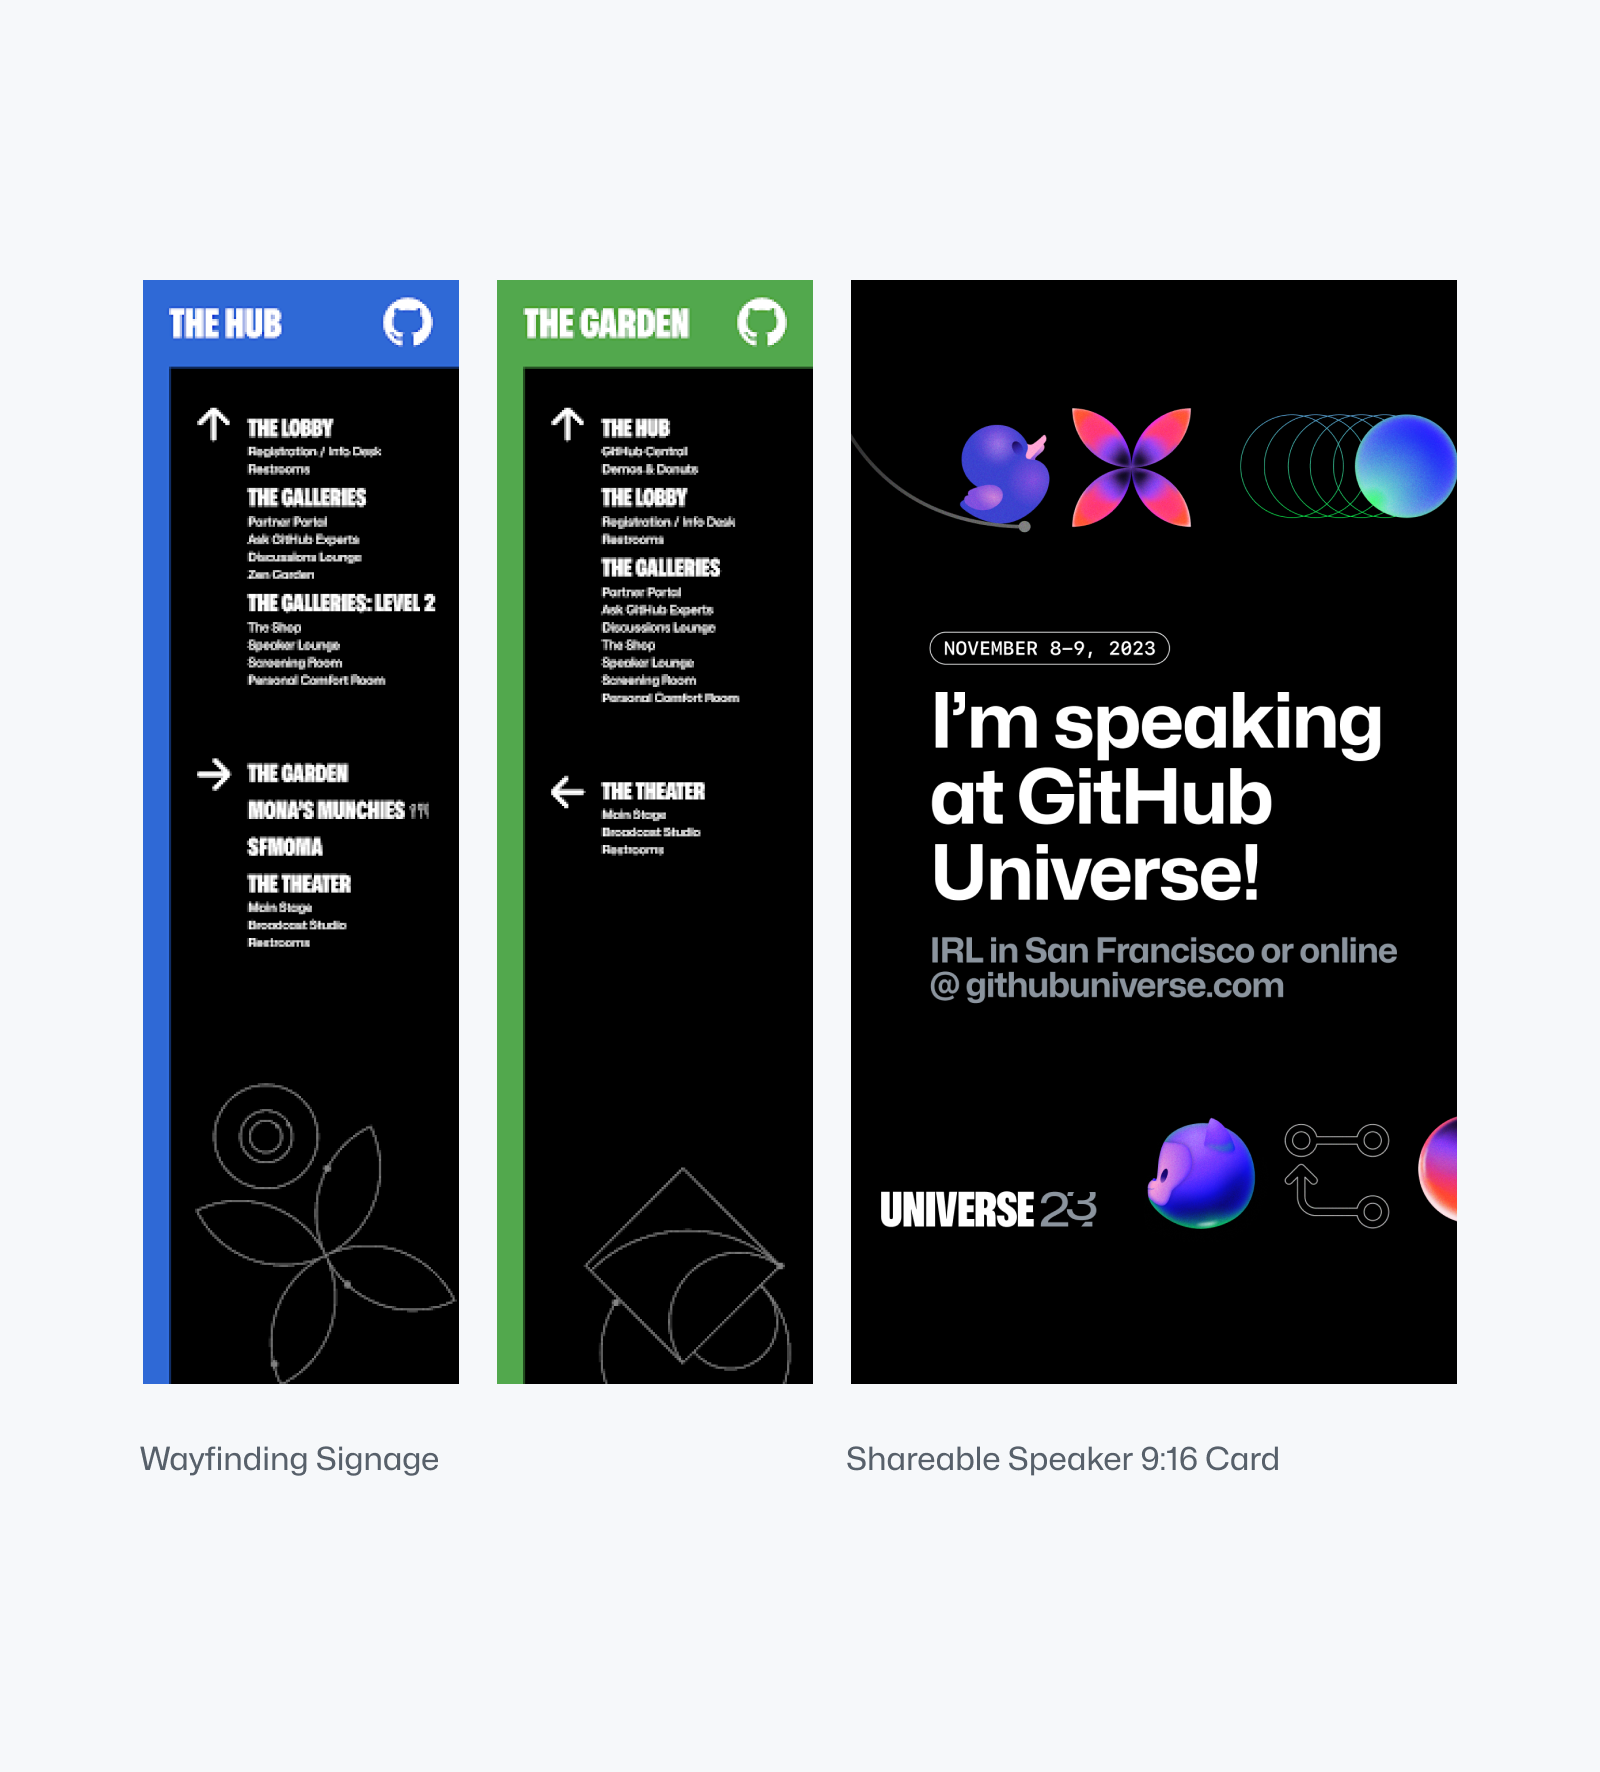 Three example assets from GitHub Universe 2023. Two of them are wayfinding signage for The Hub and The Garden in blue and green respectively. The third is a 9:16 speaker card that says "I'm speaking at GitHub Universe" paired with an illustration of Mona, a duck, and some colorful abstract shapes